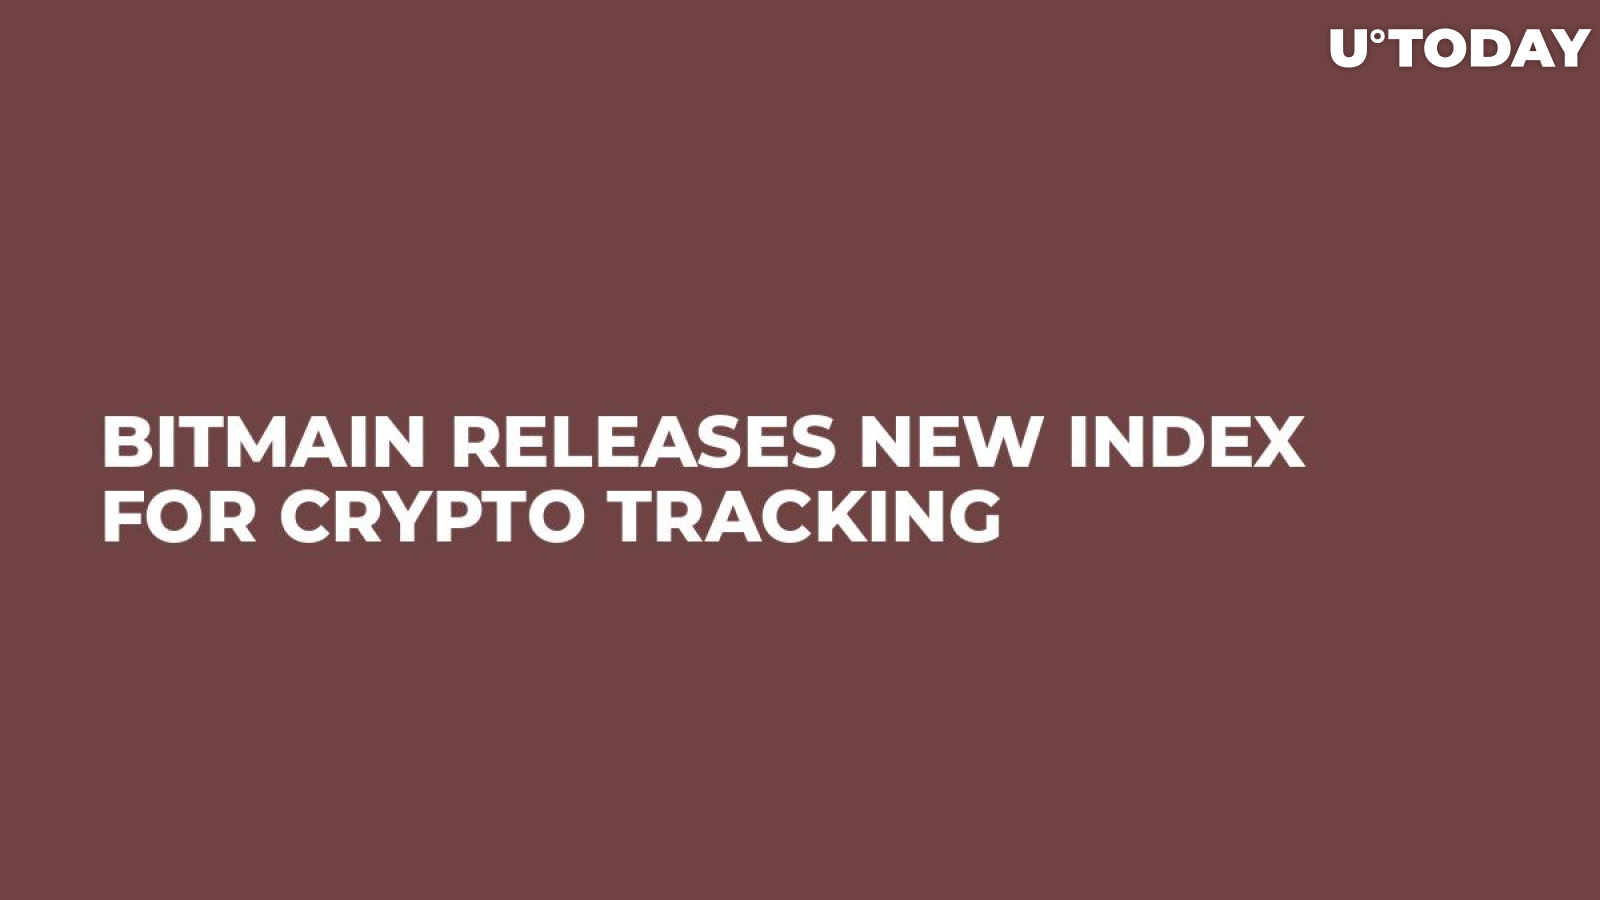 Bitmain Releases New Index for Crypto Tracking